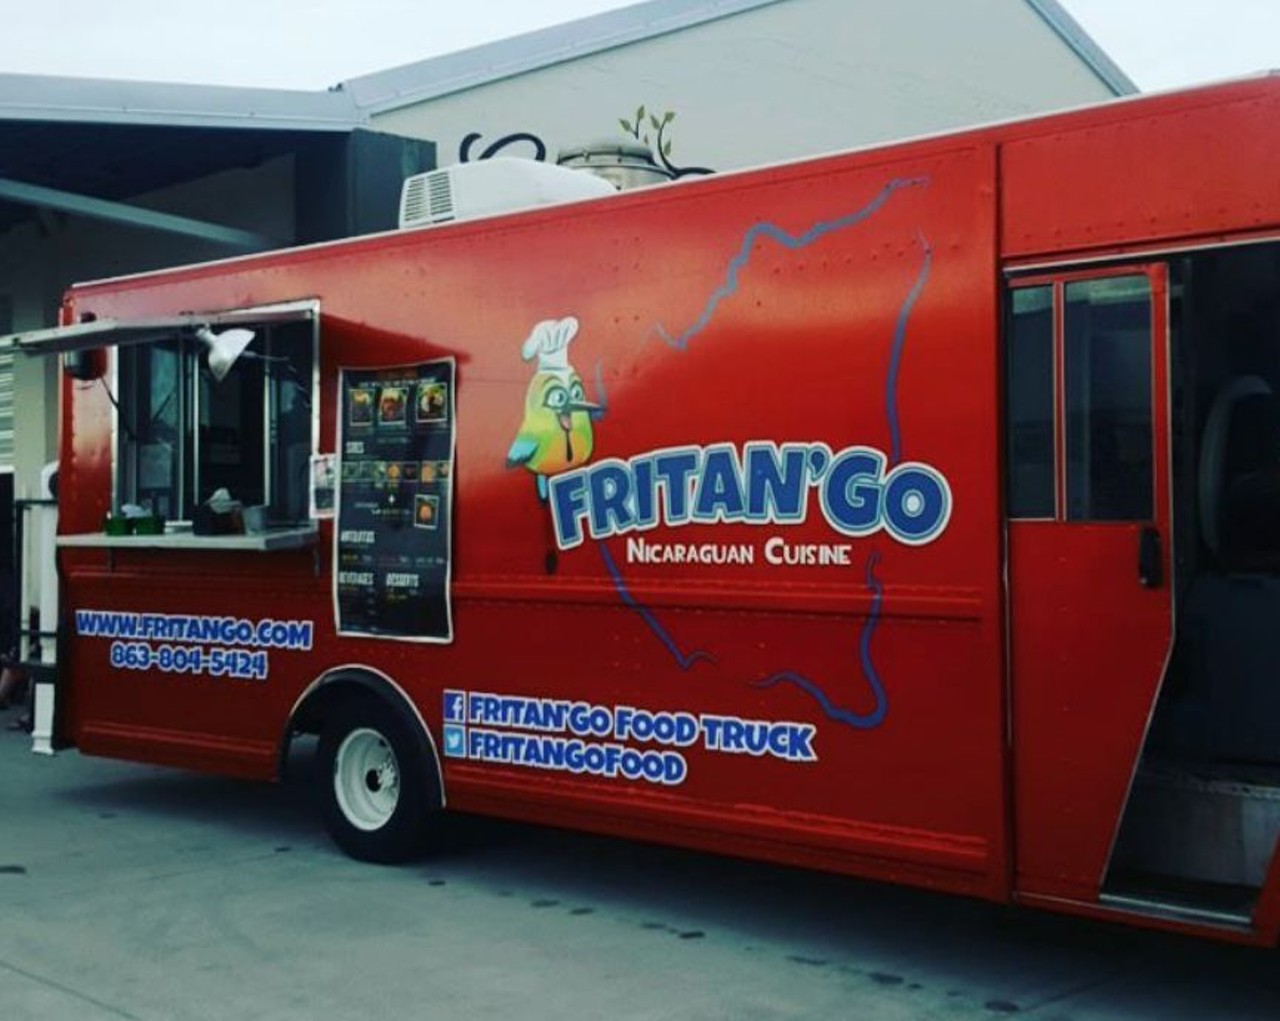 Fritan&#146;go Food Truck  
Mobile, 863-804-5424
You might find them in Lakeland, Tampa, Orlando or anywhere in between. That being said, tracking them down for Nicaraguan classics like tostones or cerdo asada is worth it.
Photo via fritanfofoodtruck/ Instagram